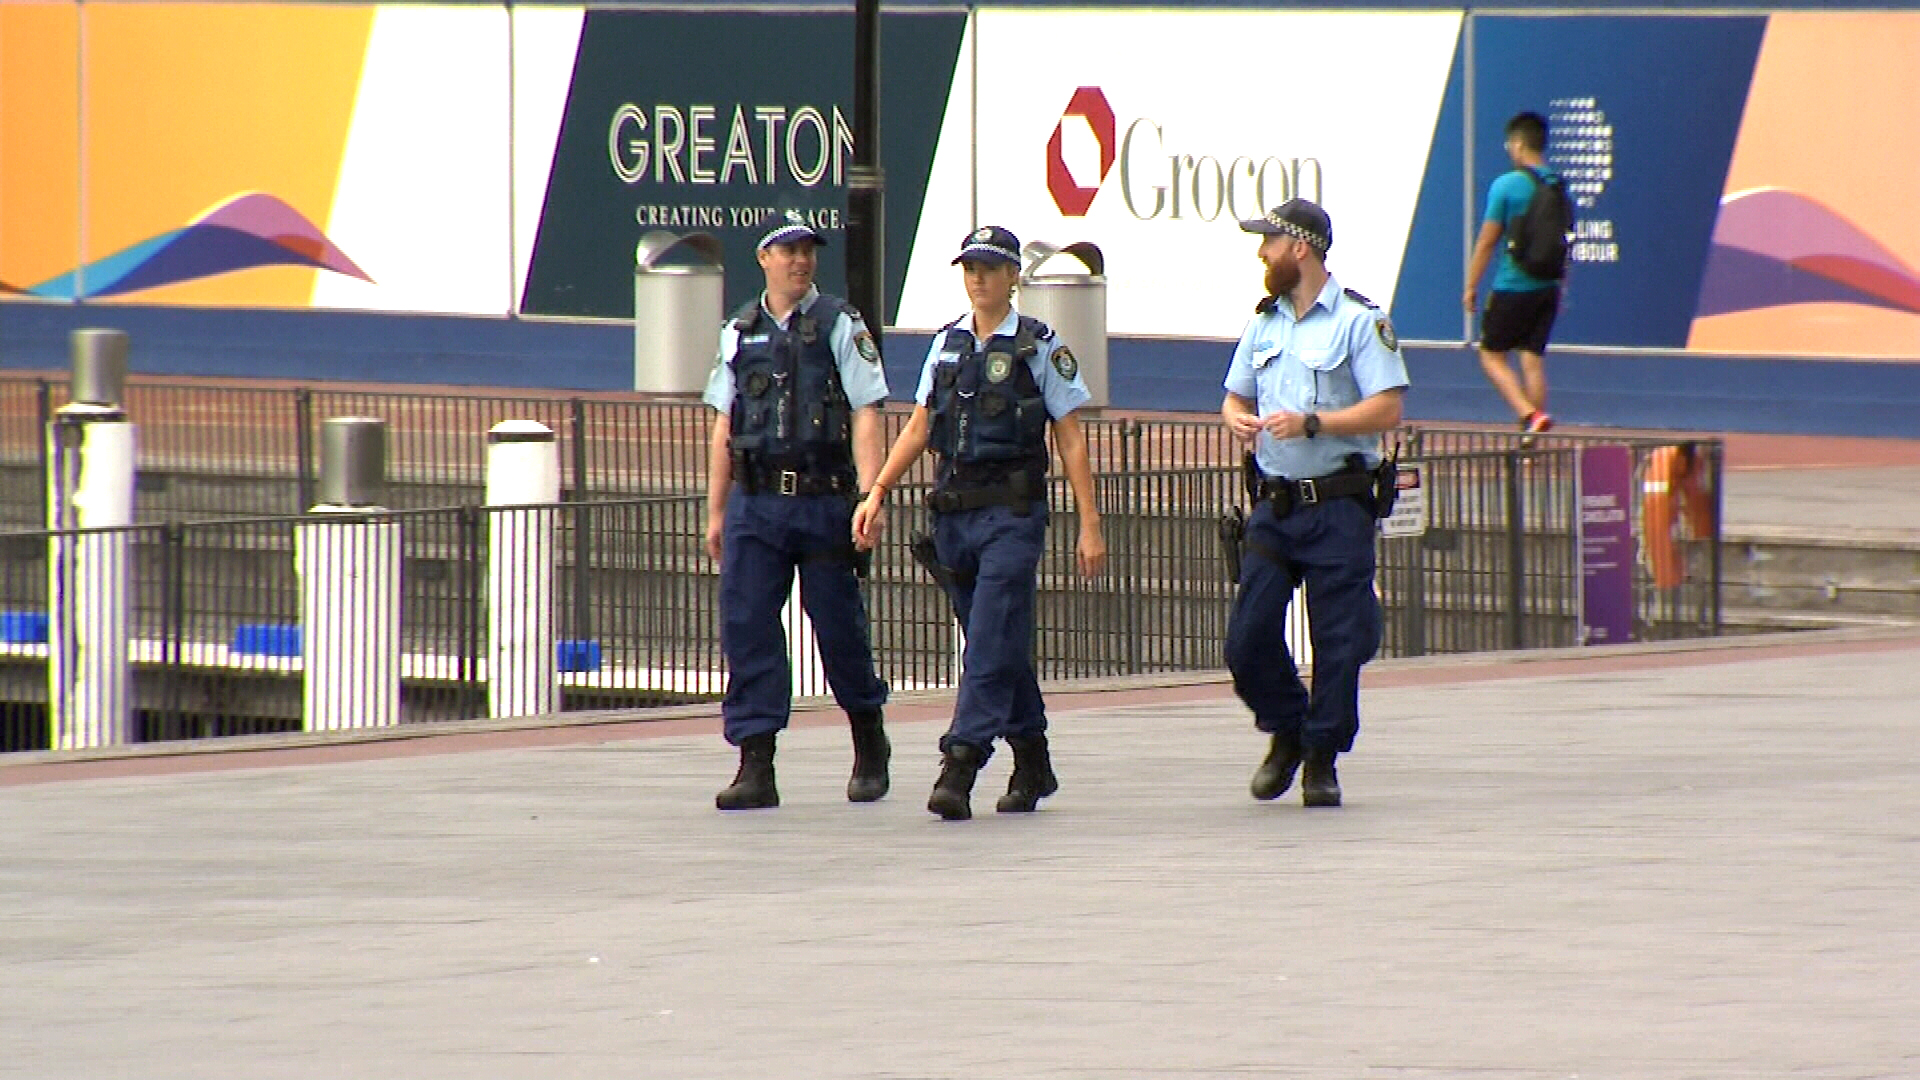 NSW Police patrol a deserted area by Sydney harbour. The city is under tight social distancing restrictions.